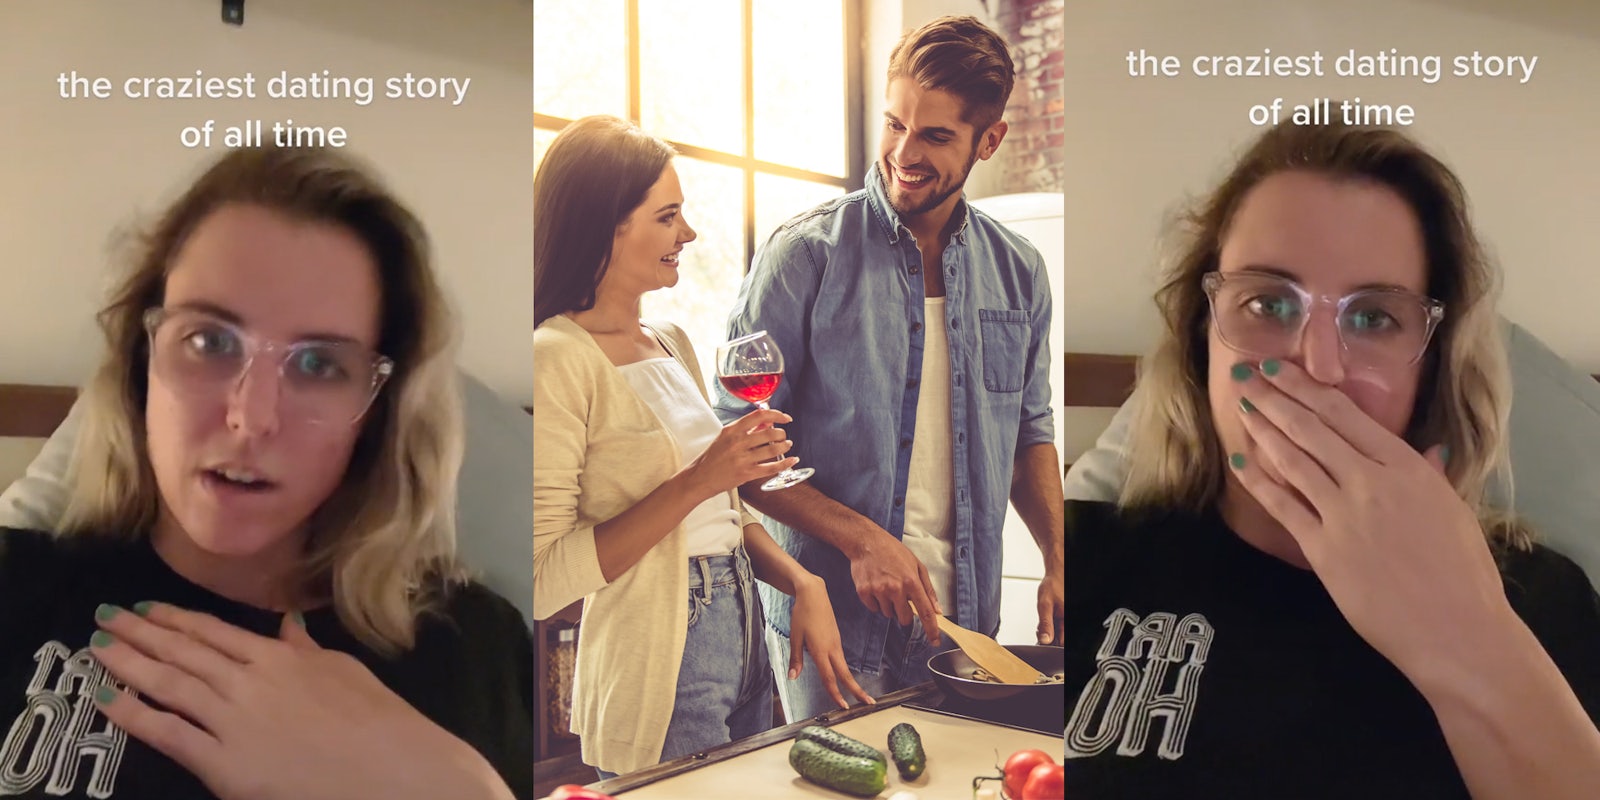 woman hand on chest caption 'the craziest dating story of all time' (l) man and woman on date man cooking for woman holding wine glass in her hand (c) woman hand over mouth shocked caption 'the craziest dating story of all time' (r)